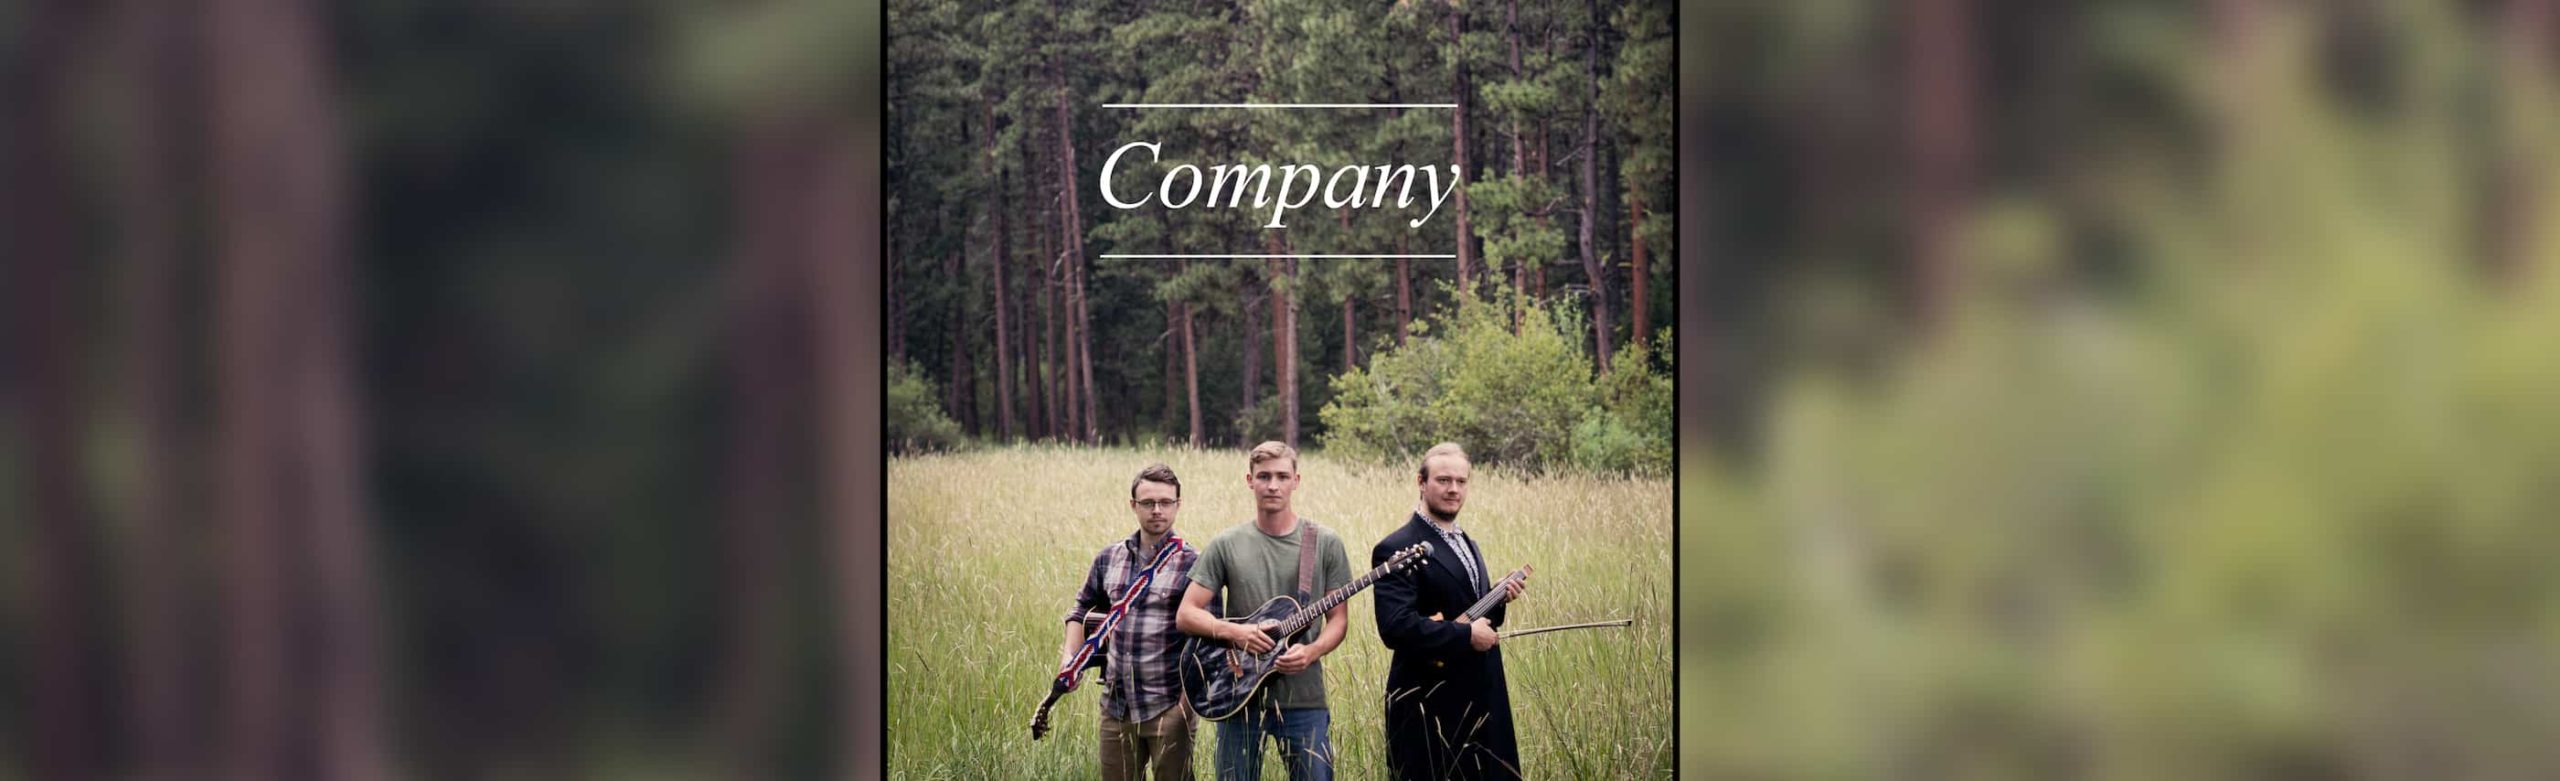 Missoula’s TopHouse Releases New Single “Company” Image